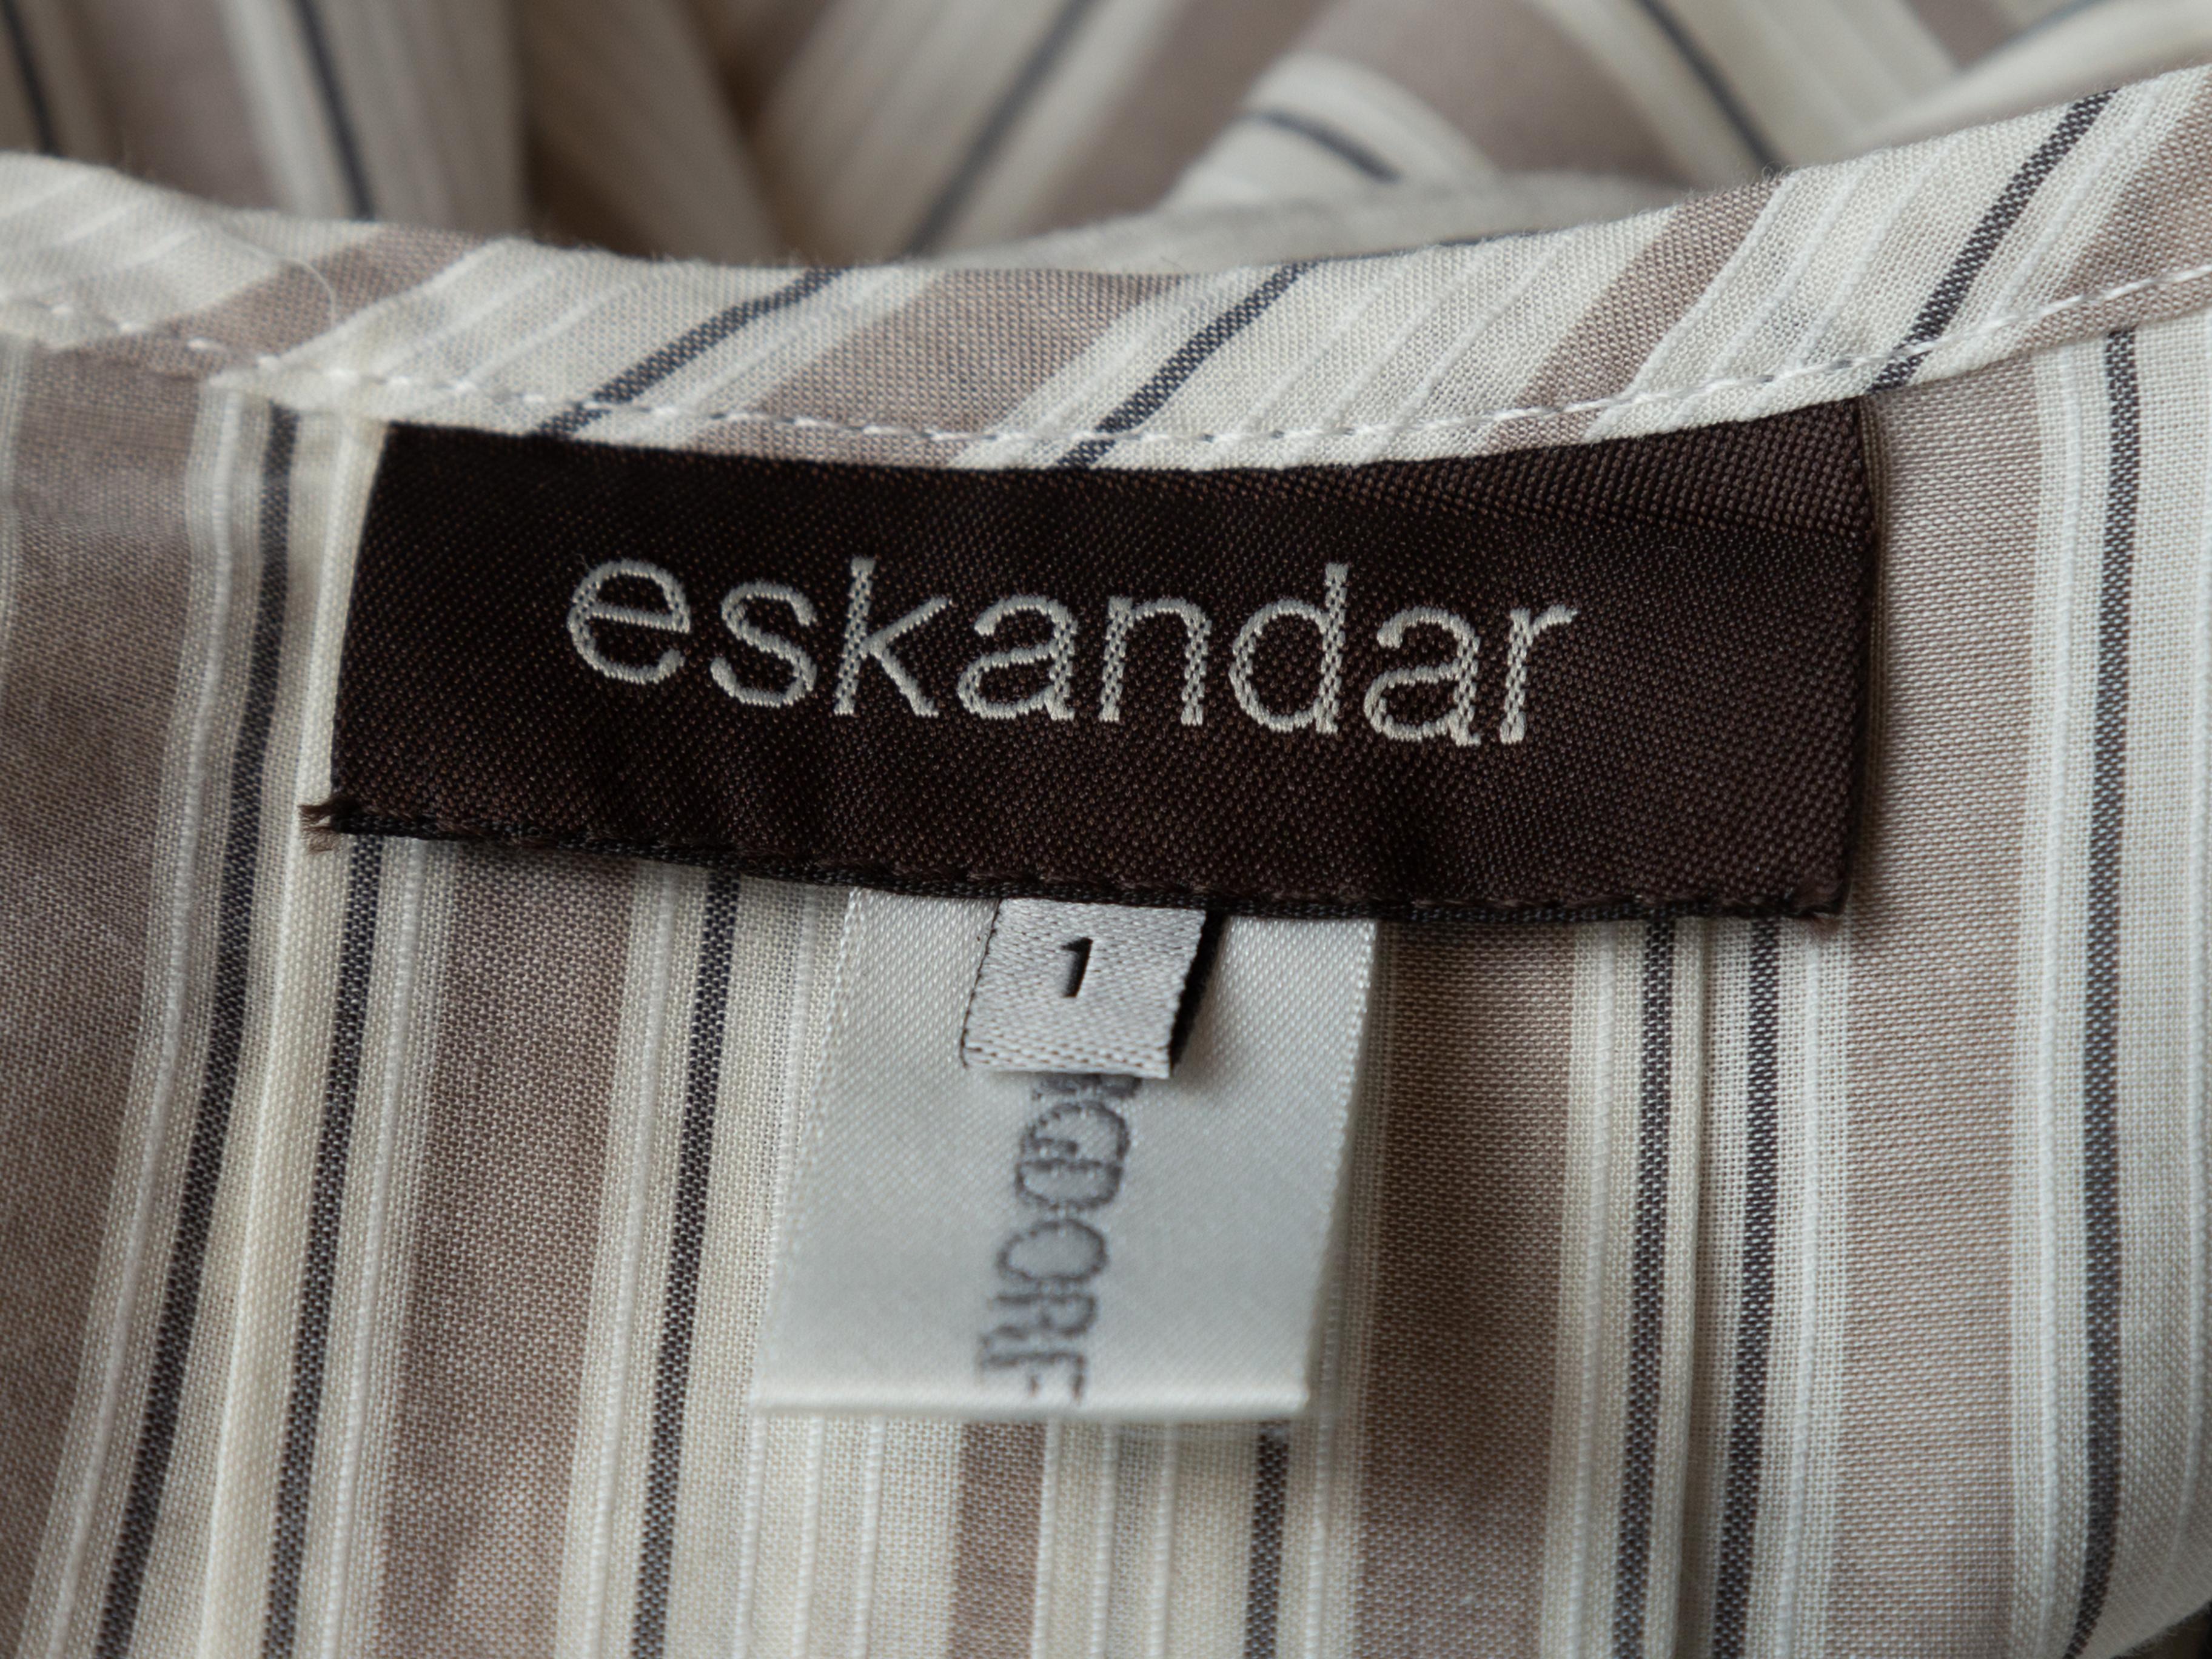 Product details: White and grey long sleeve button-up top by Eskandar. Striped pattern throughout. Crew neck. Button closures at center front. 44